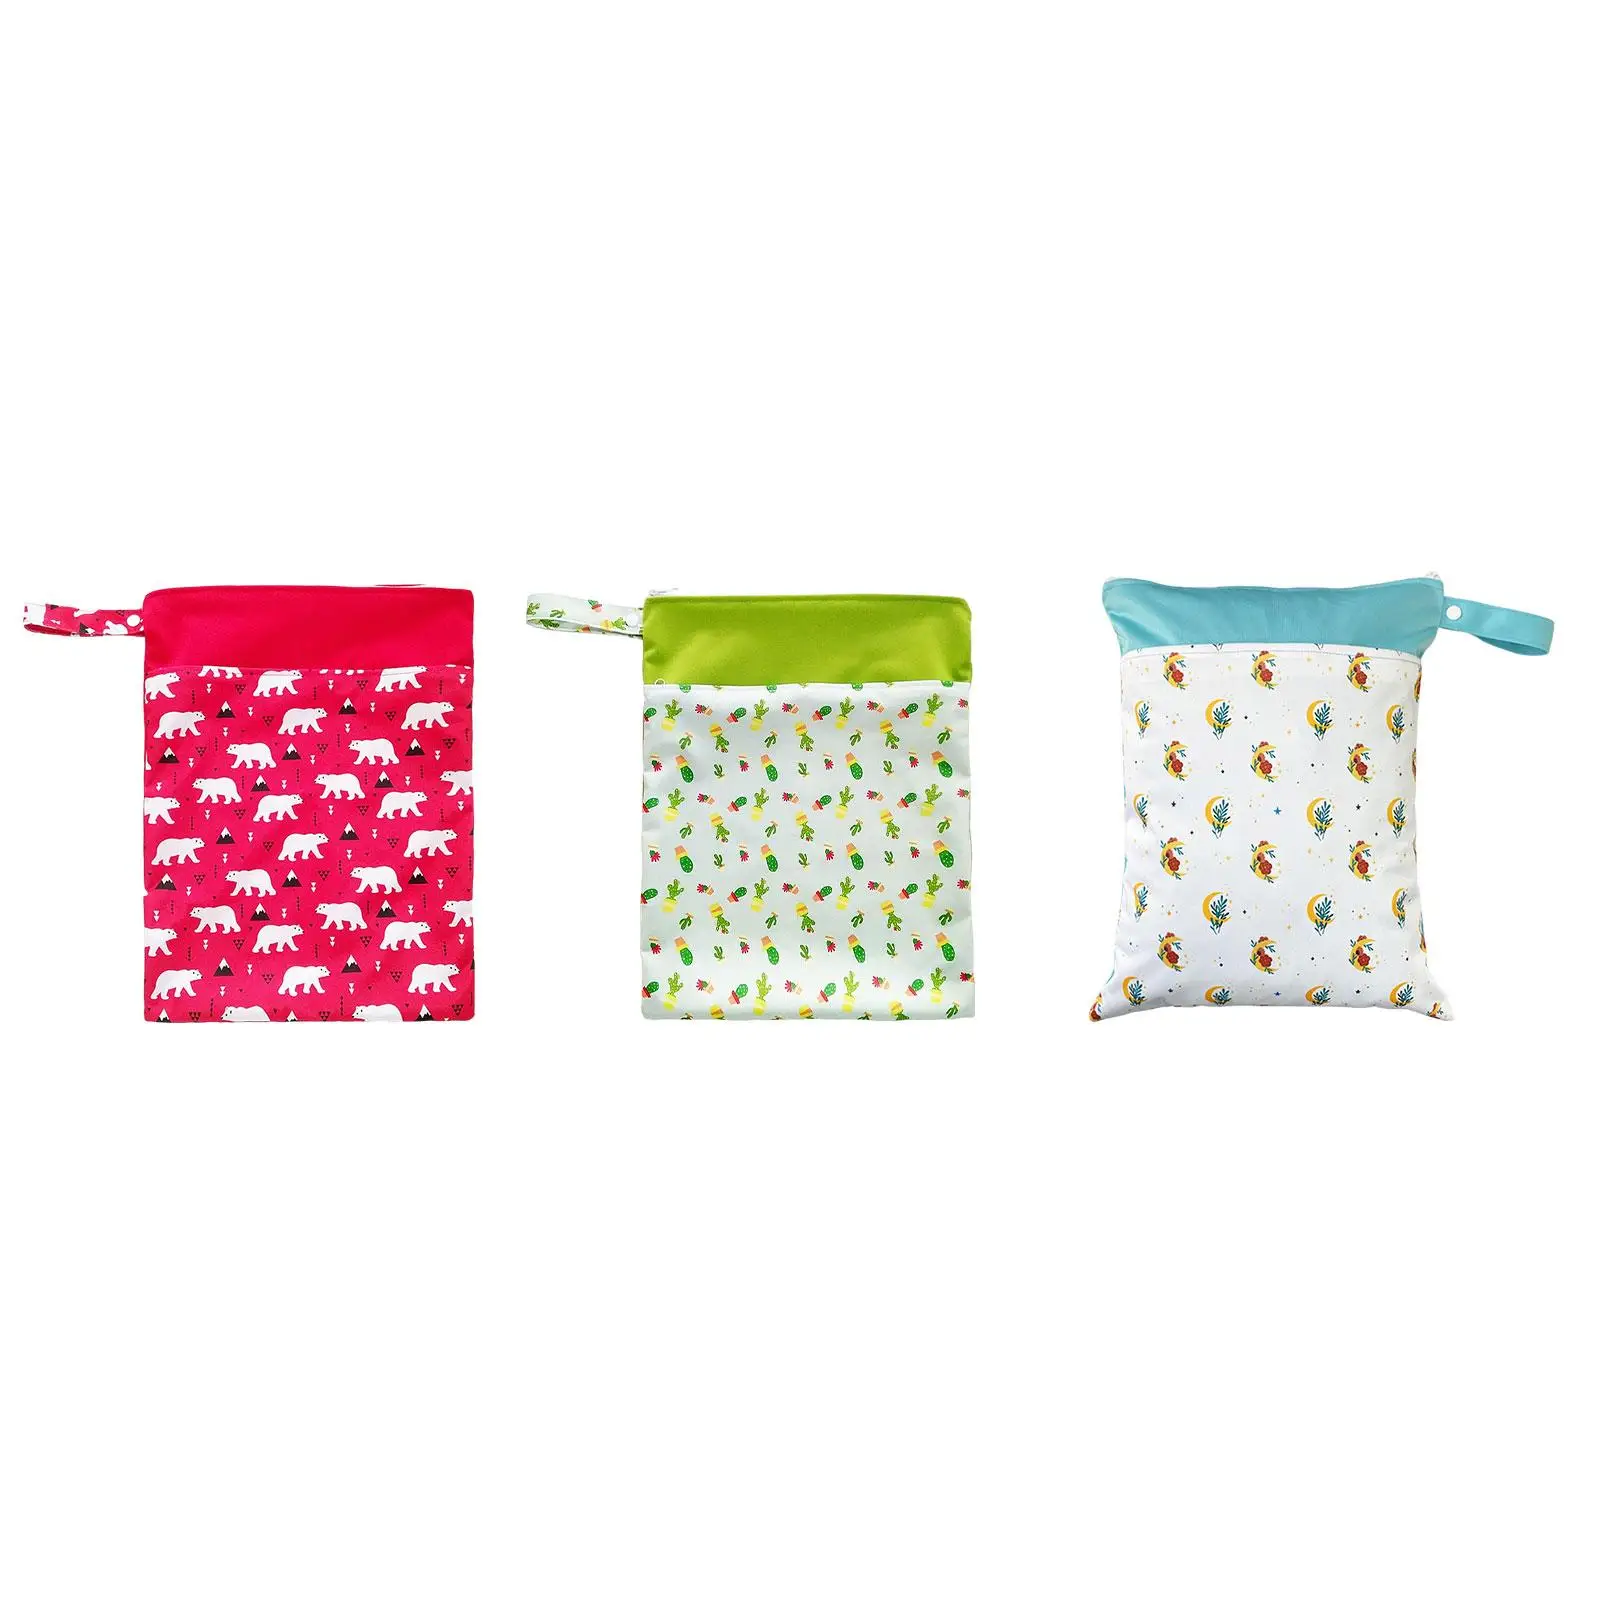 Baby Cloth Diaper Wet and Dry Bag Daycare Gym Hanging Baby Nappy Laundry Storage Bag Double Zippers Pockets Washable Wet Bags